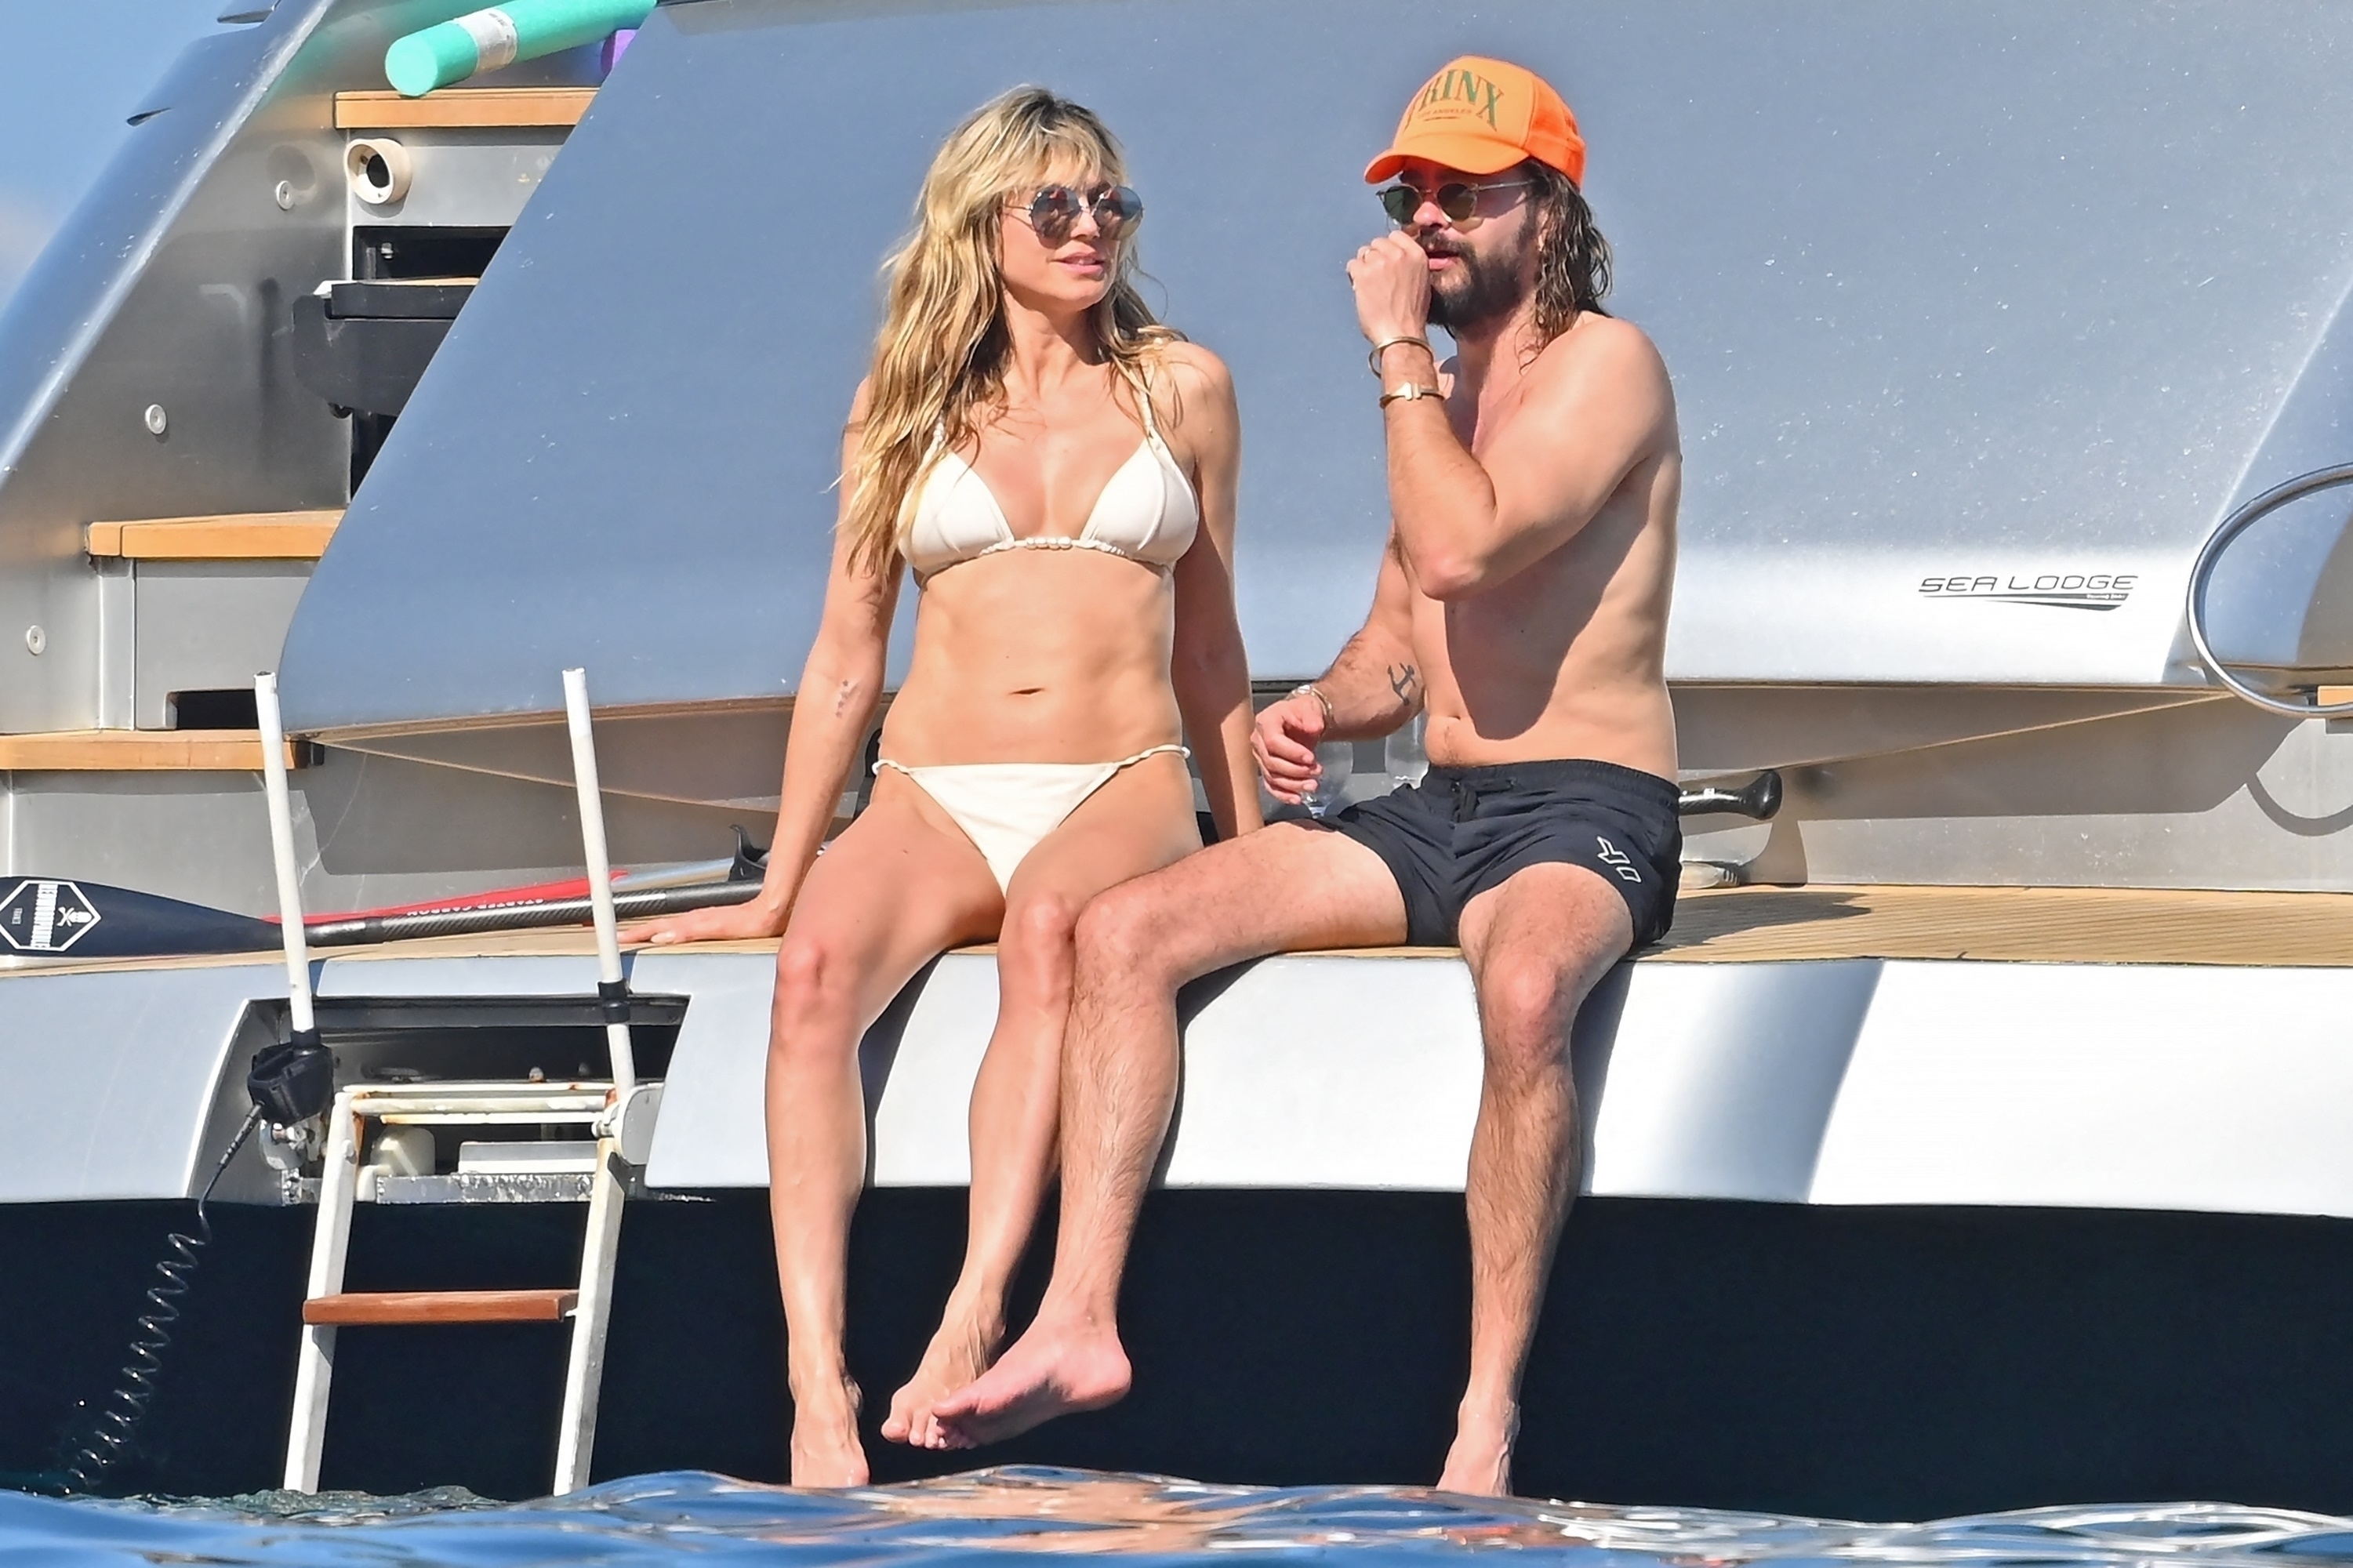 <p><a href="https://www.wonderwall.com/celebrity/profiles/overview/heidi-klum-295.article">Heidi Klum</a> and her husband, rocker Tom Kaulitz, who's more than 16 years her junior, relaxed during a romantic yacht trip off the coast of Cannes on France's Côte d'Azur on May 30 -- two days before her 50th birthday.</p>